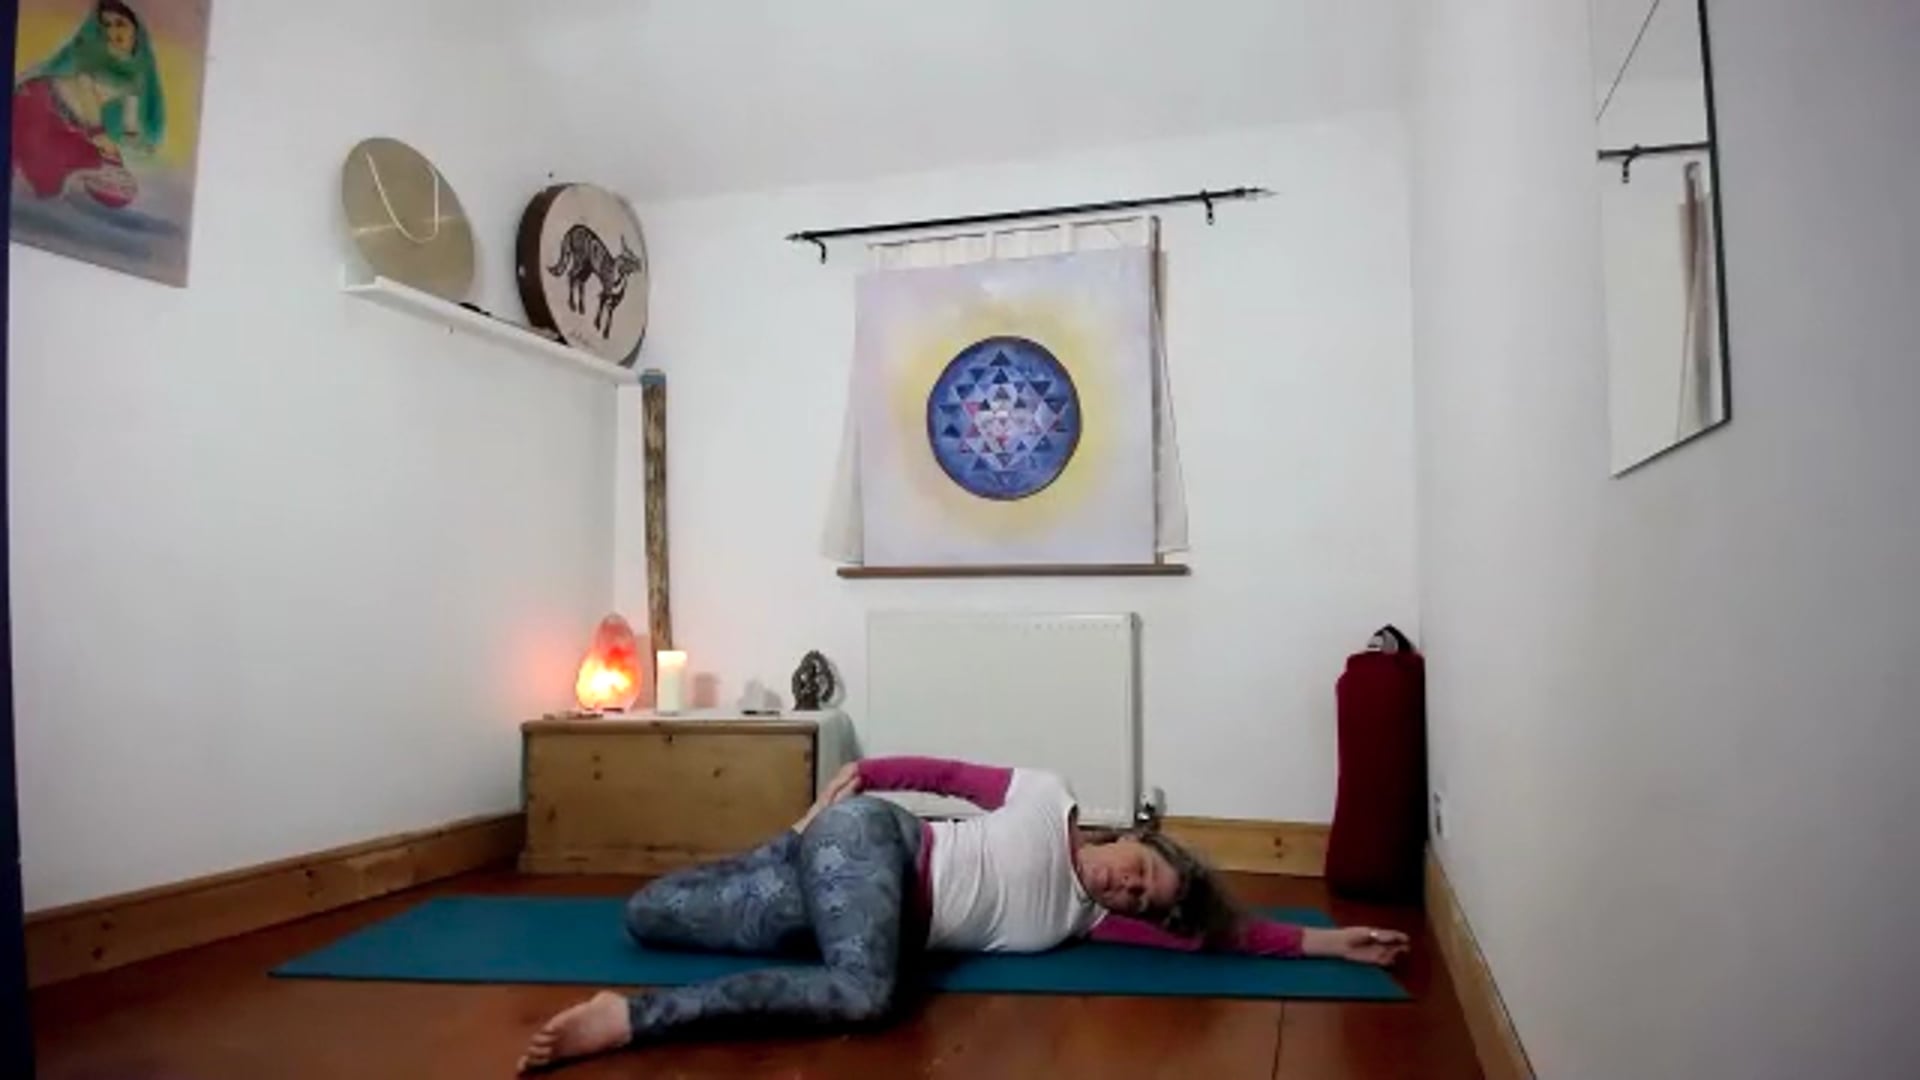 Multilevel Class 5 Freedom and Ease  With beautiful flows we release through the hips, psoas and shoulders.